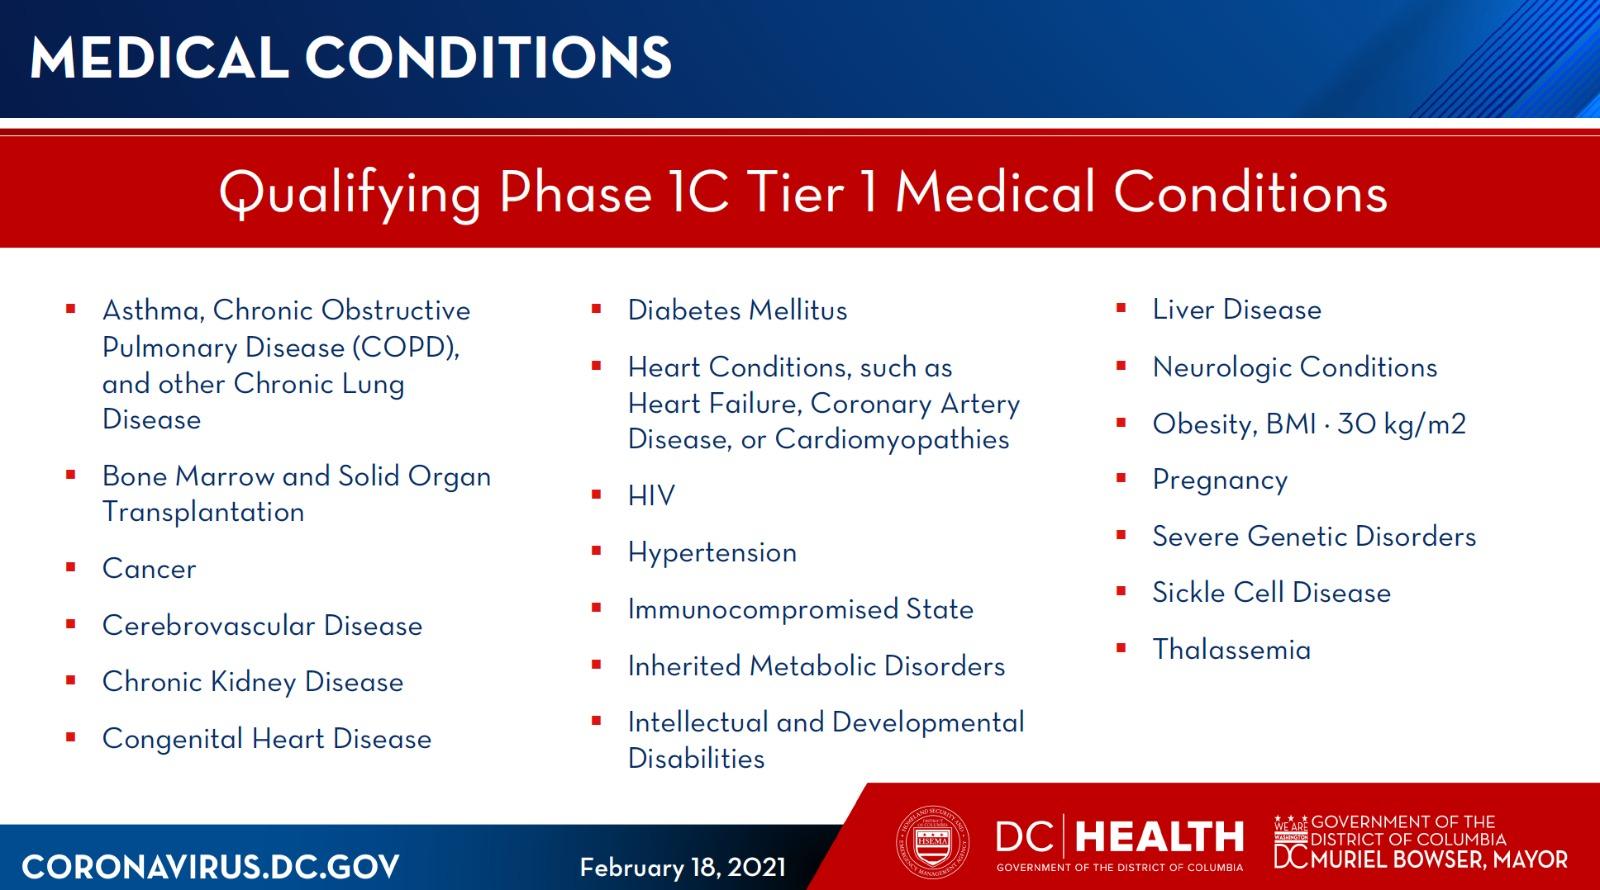 Medical Conditions List